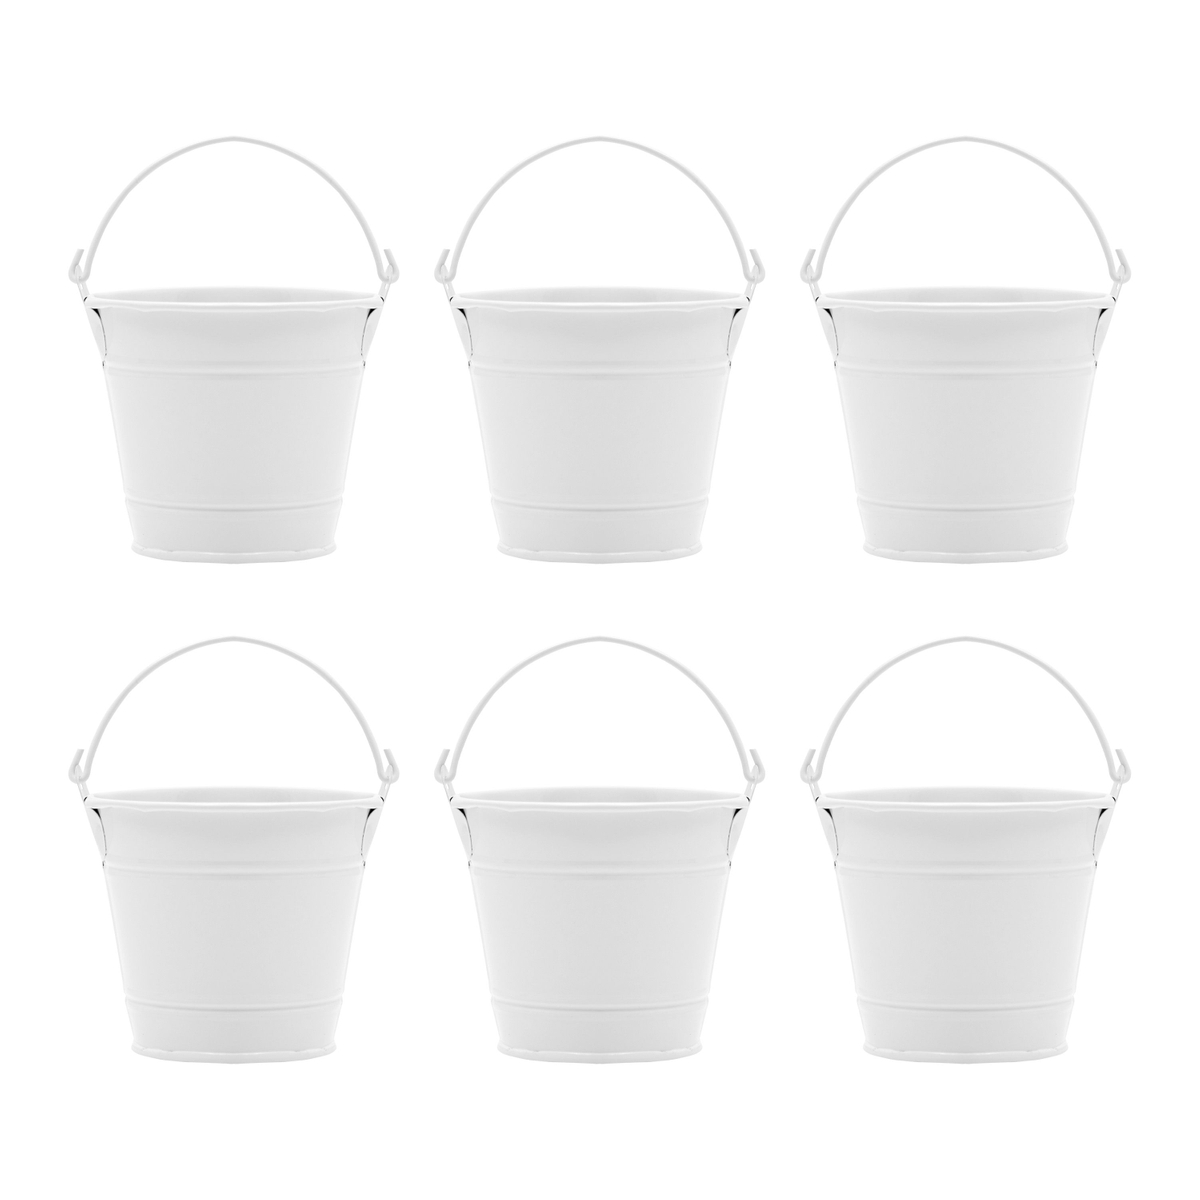 6 Pack White Mini Galvanized Buckets with Handles for Party Favors, Wedding  Decorations, Easter Centerpieces (3.5 x 3 In)